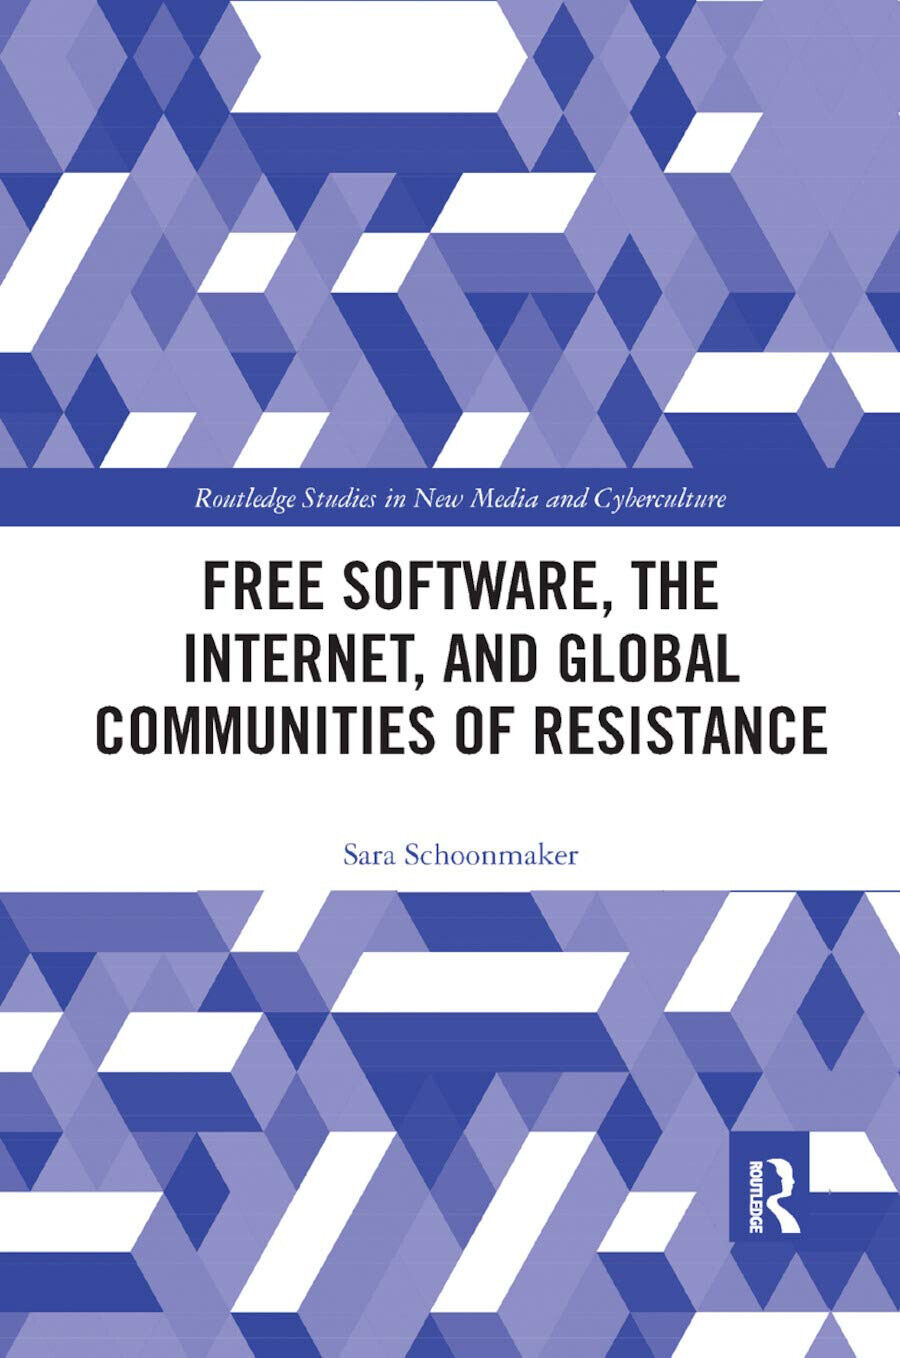 Free Software, The Internet, And Global Communities Of Resistance - 2019